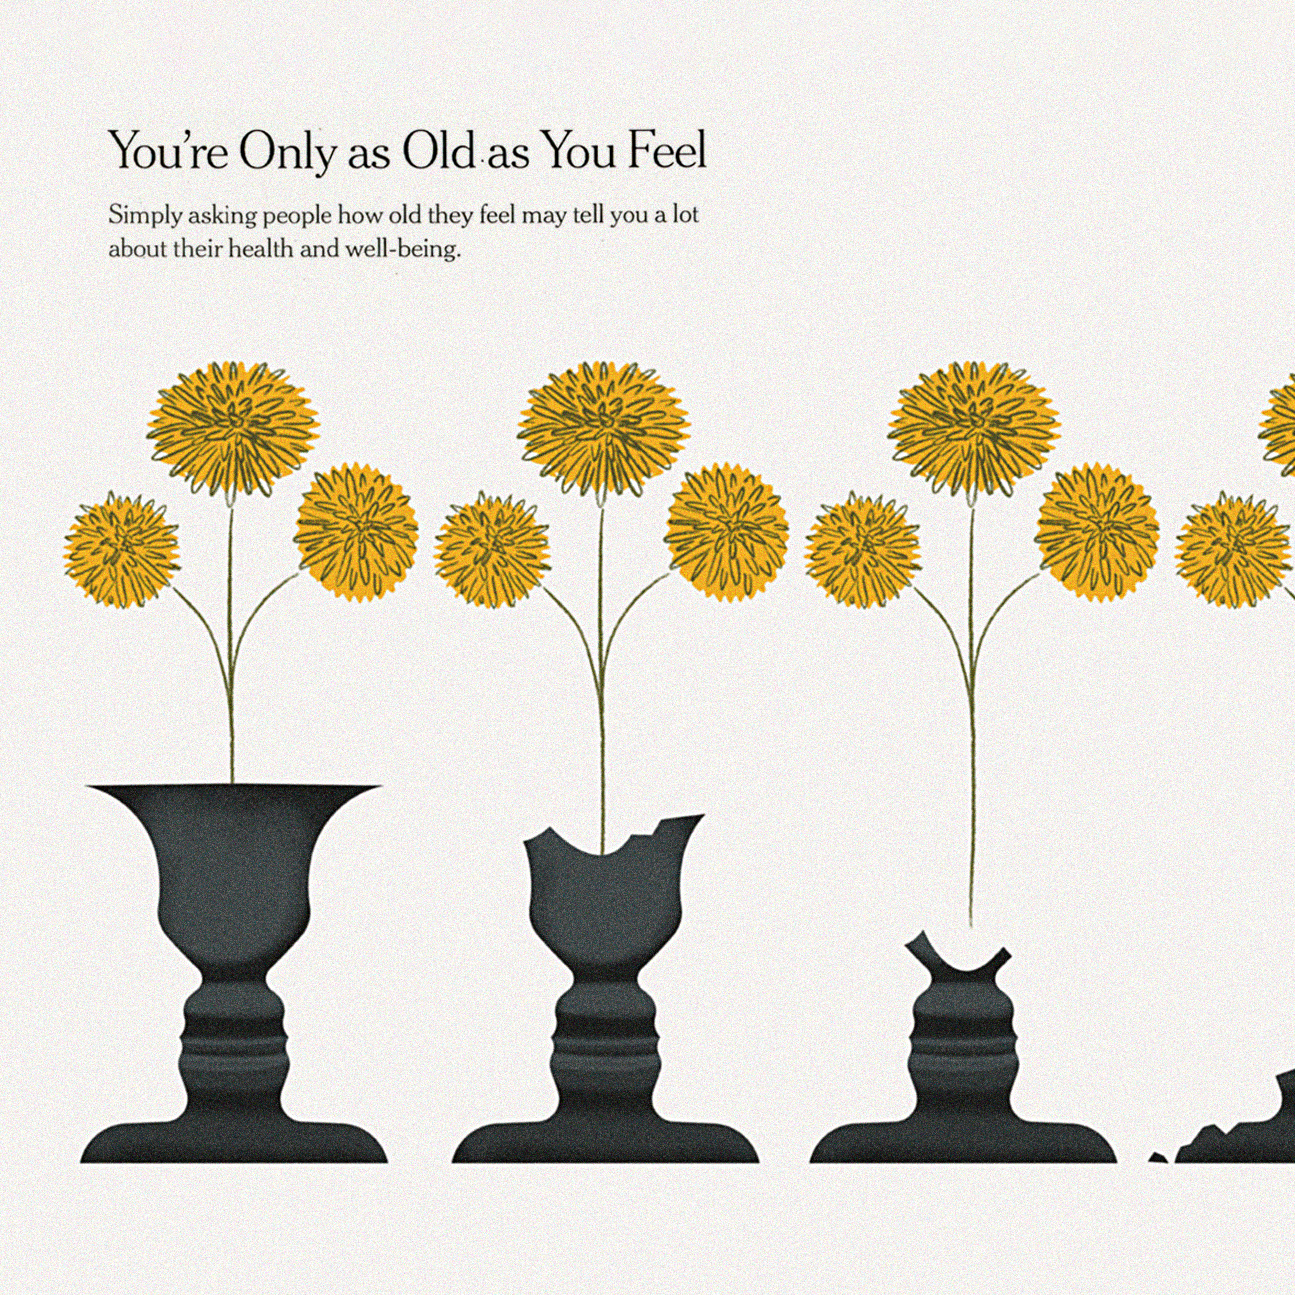 New York Times – You’re Only as Old as You Feel